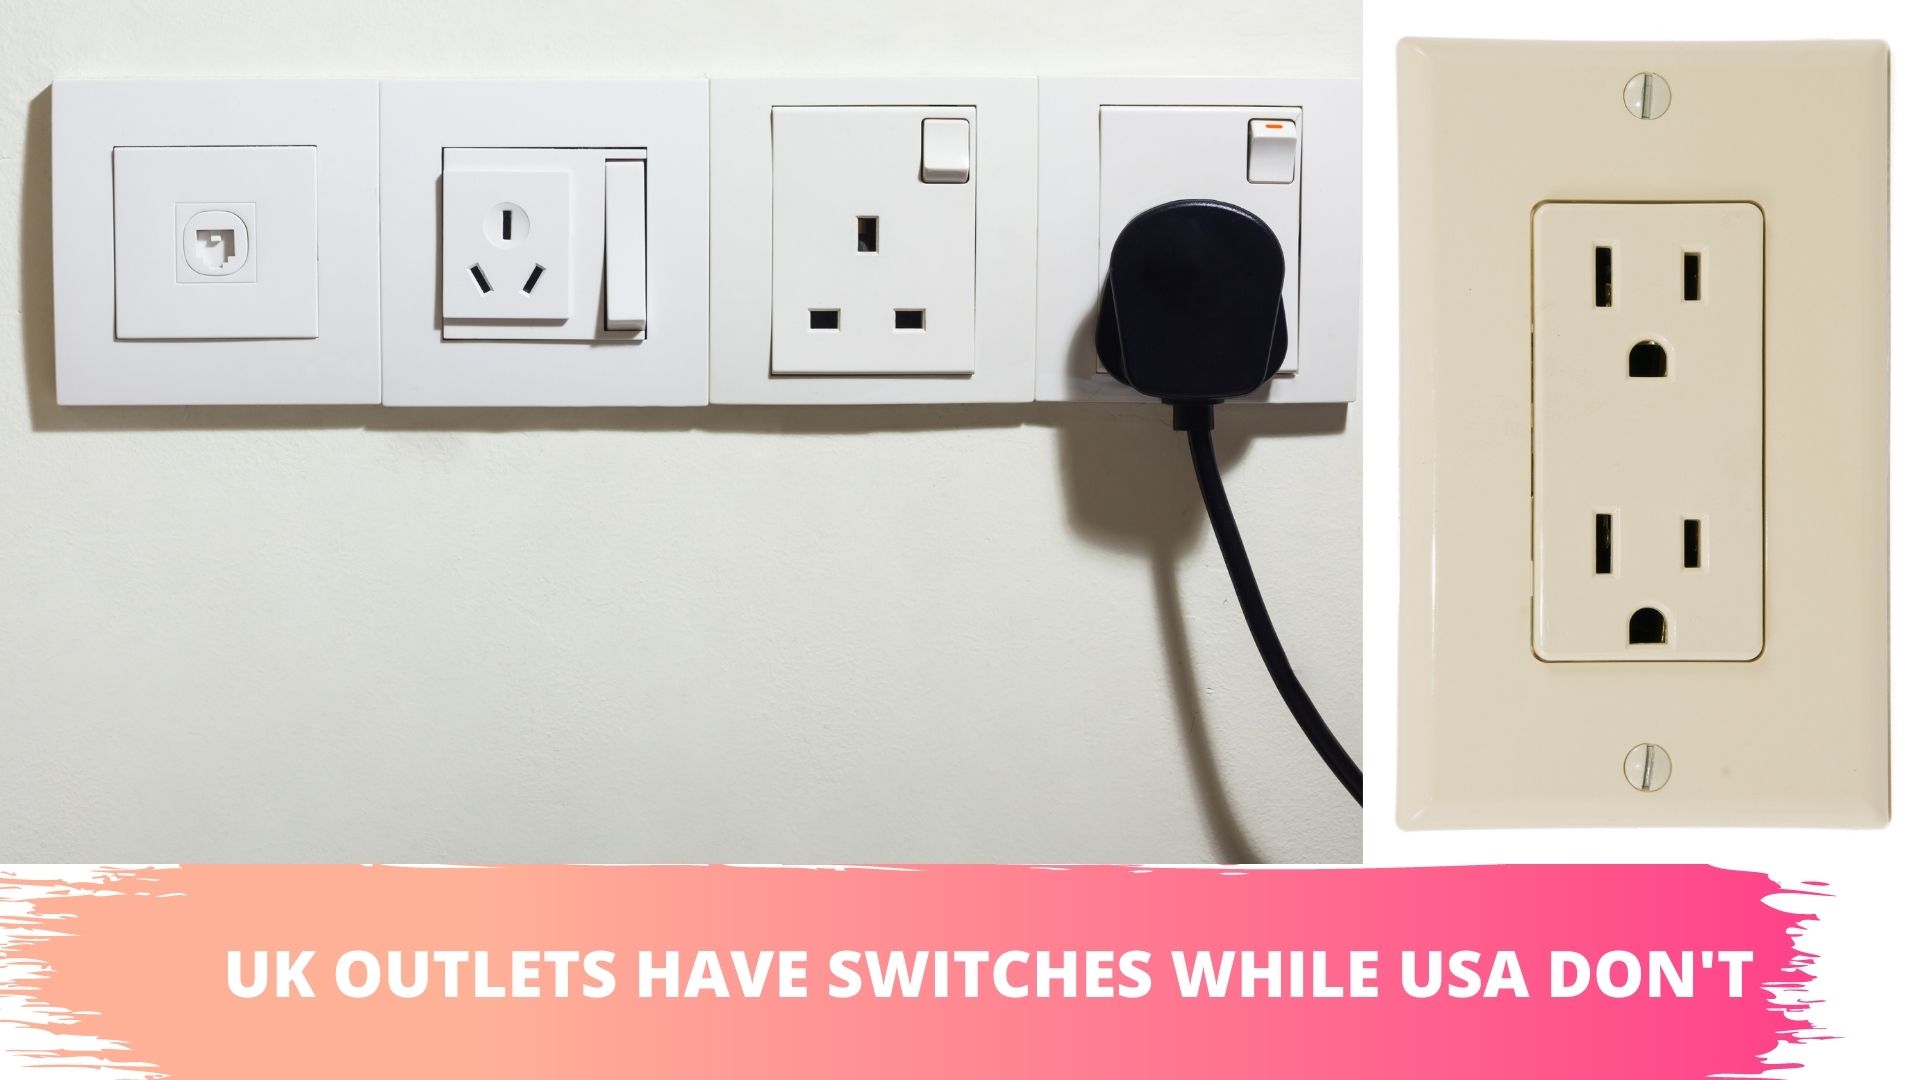 British/Australian Outlets Do Have While Americans Don't – PortablePowerGuides